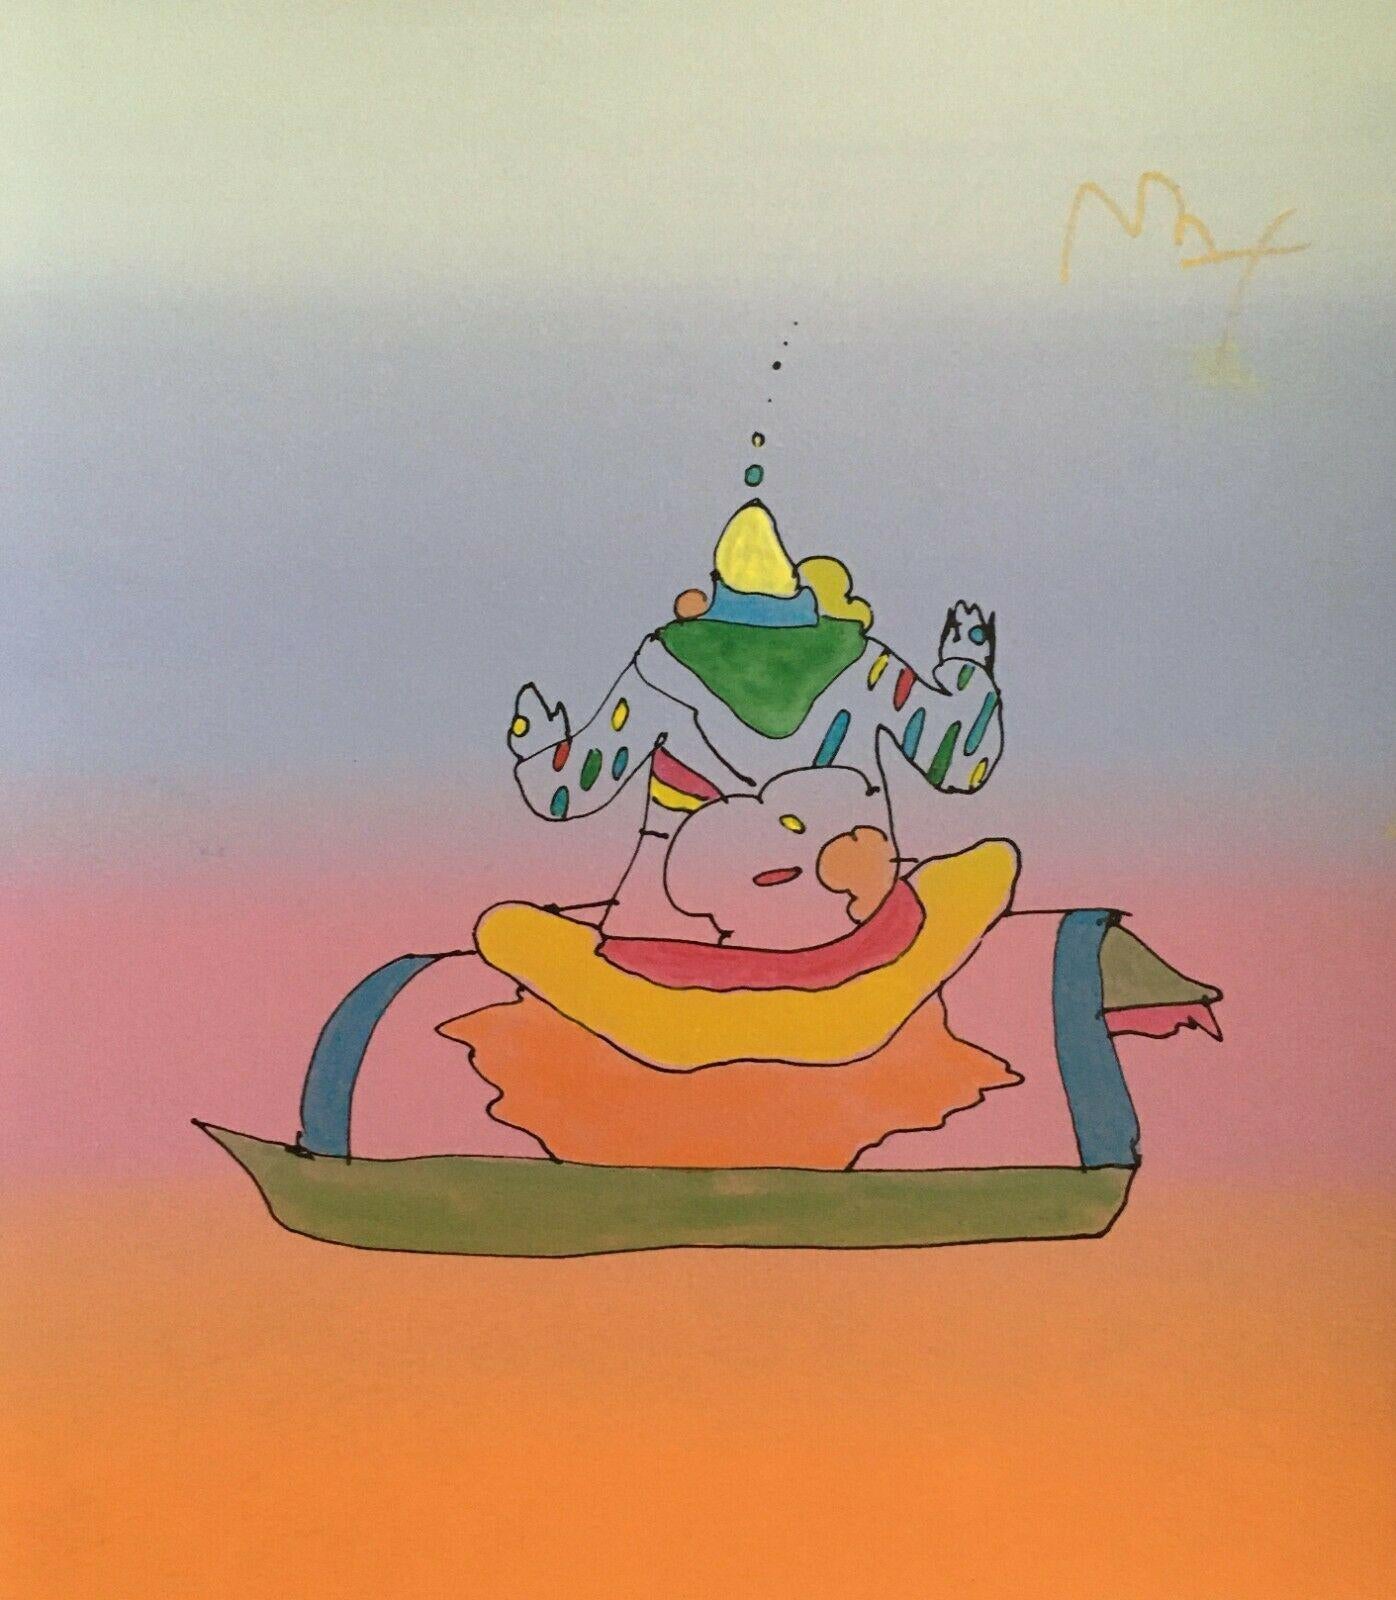 Artist: Peter Max (1937)
Title: Magic Carpet Ride
Year: circa 1998
Medium: Silkscreen and watercolor on Arches paper
Size: 13.75 x 12 inches
Condition: Excellent
Inscription: Signed in gold permanent marker.

PETER MAX (1937- ) Peter Max has